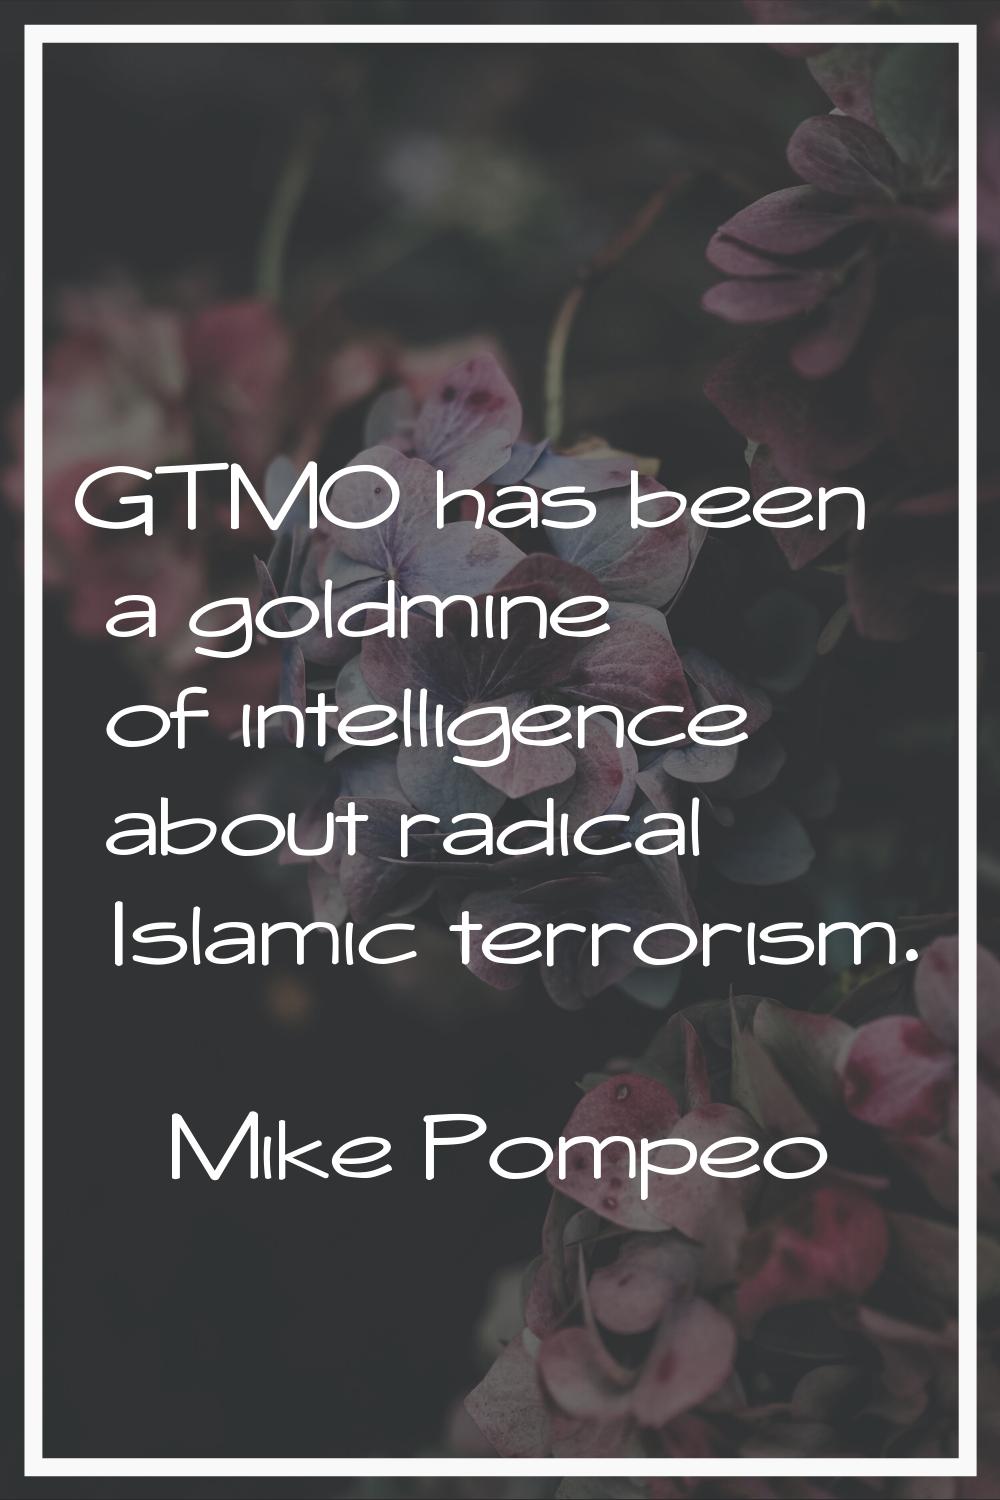 GTMO has been a goldmine of intelligence about radical Islamic terrorism.